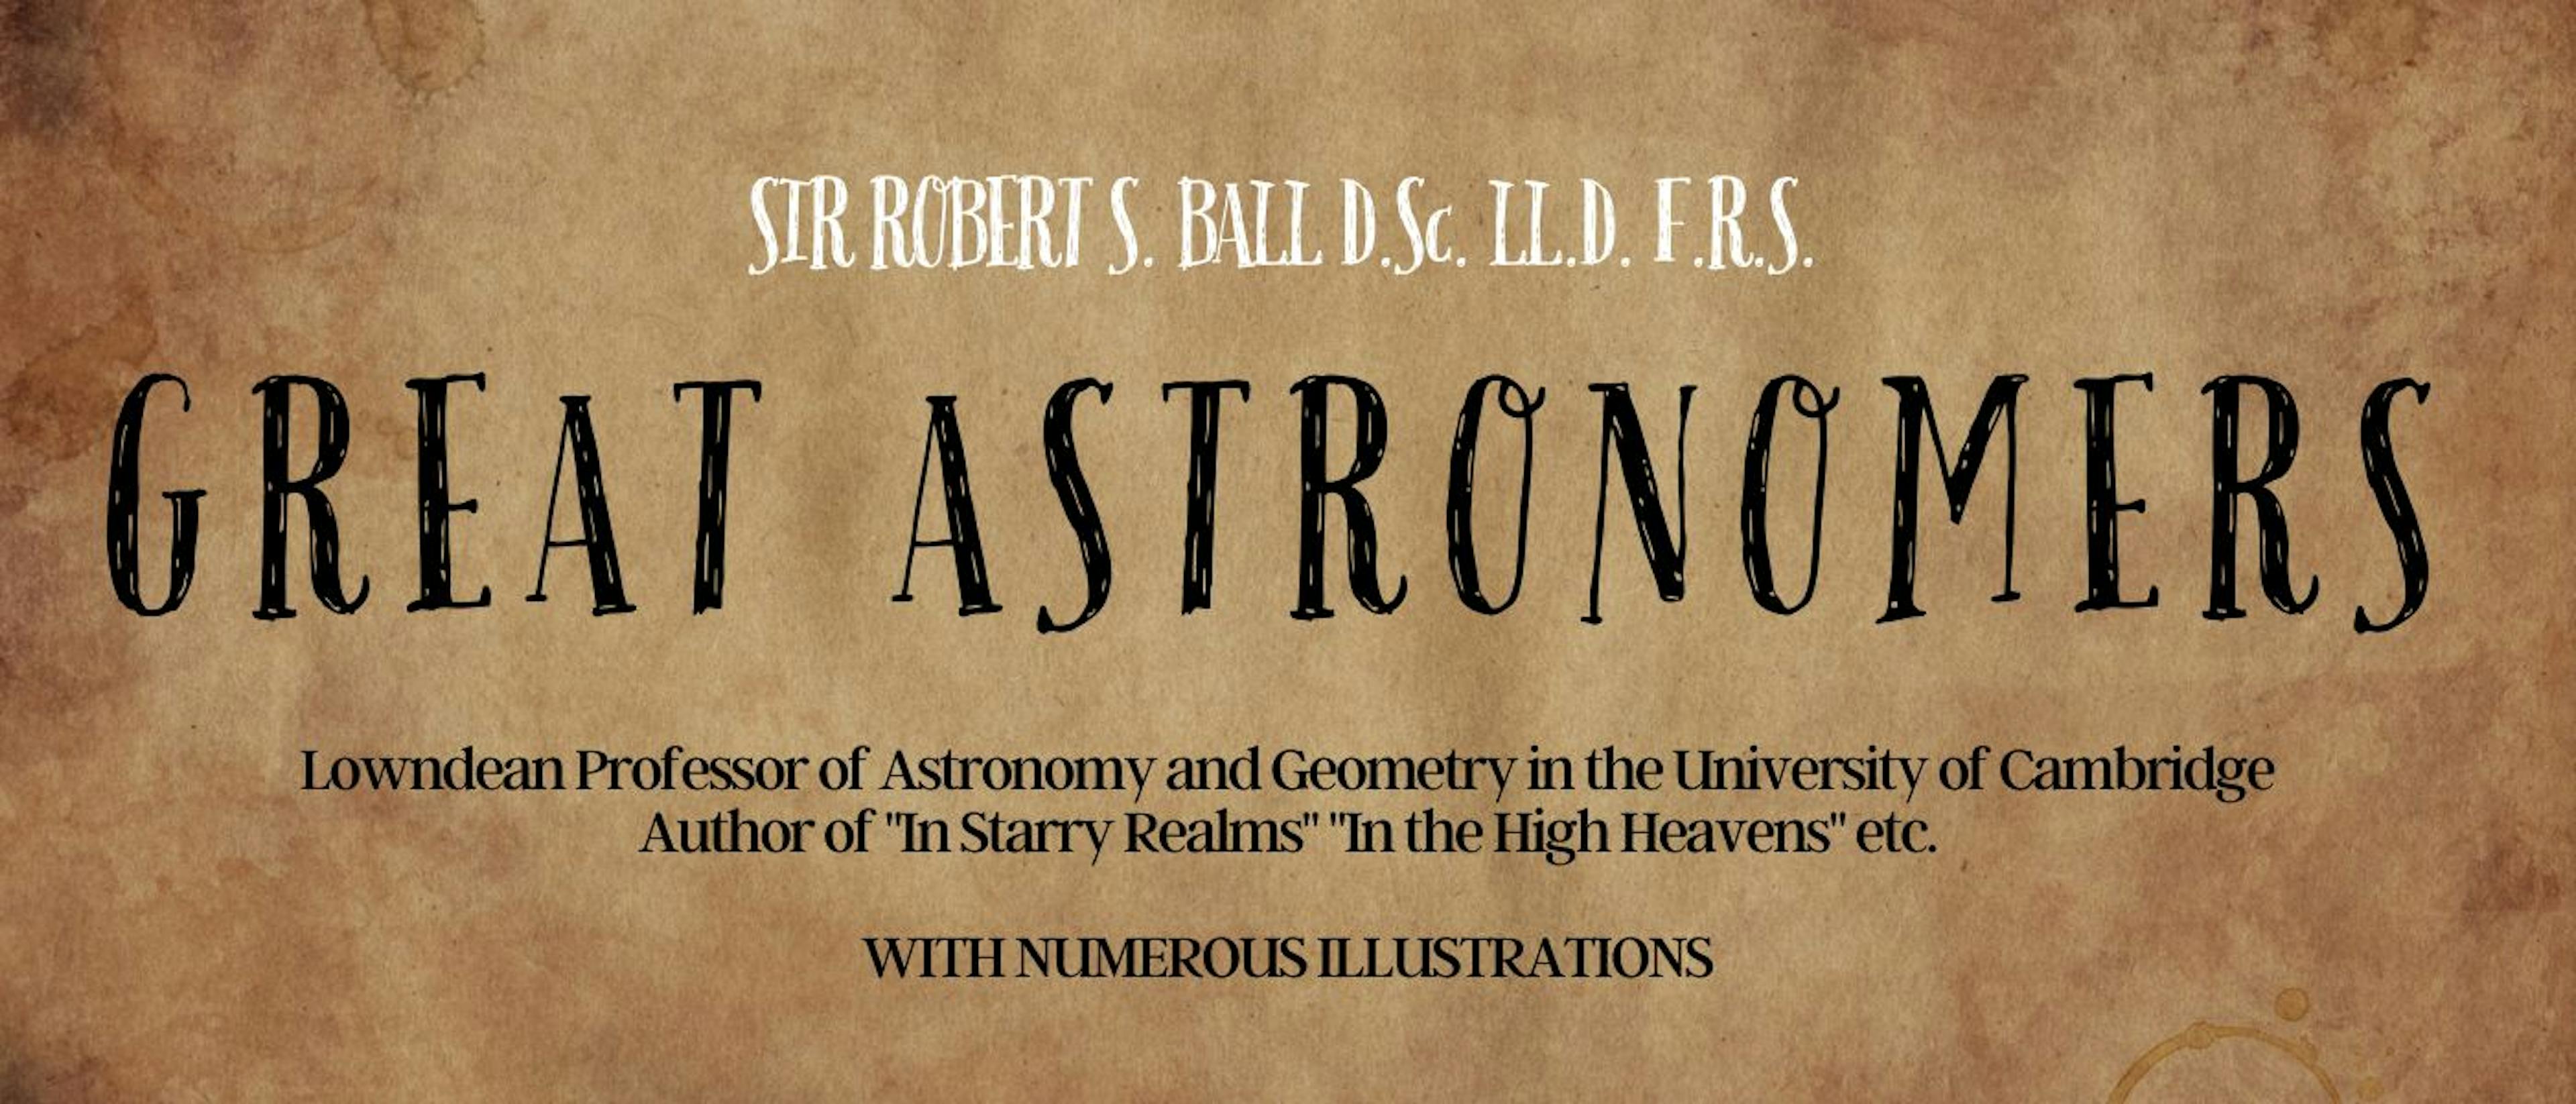 featured image - Great Astronomers by Robert S. Ball - Table of Links